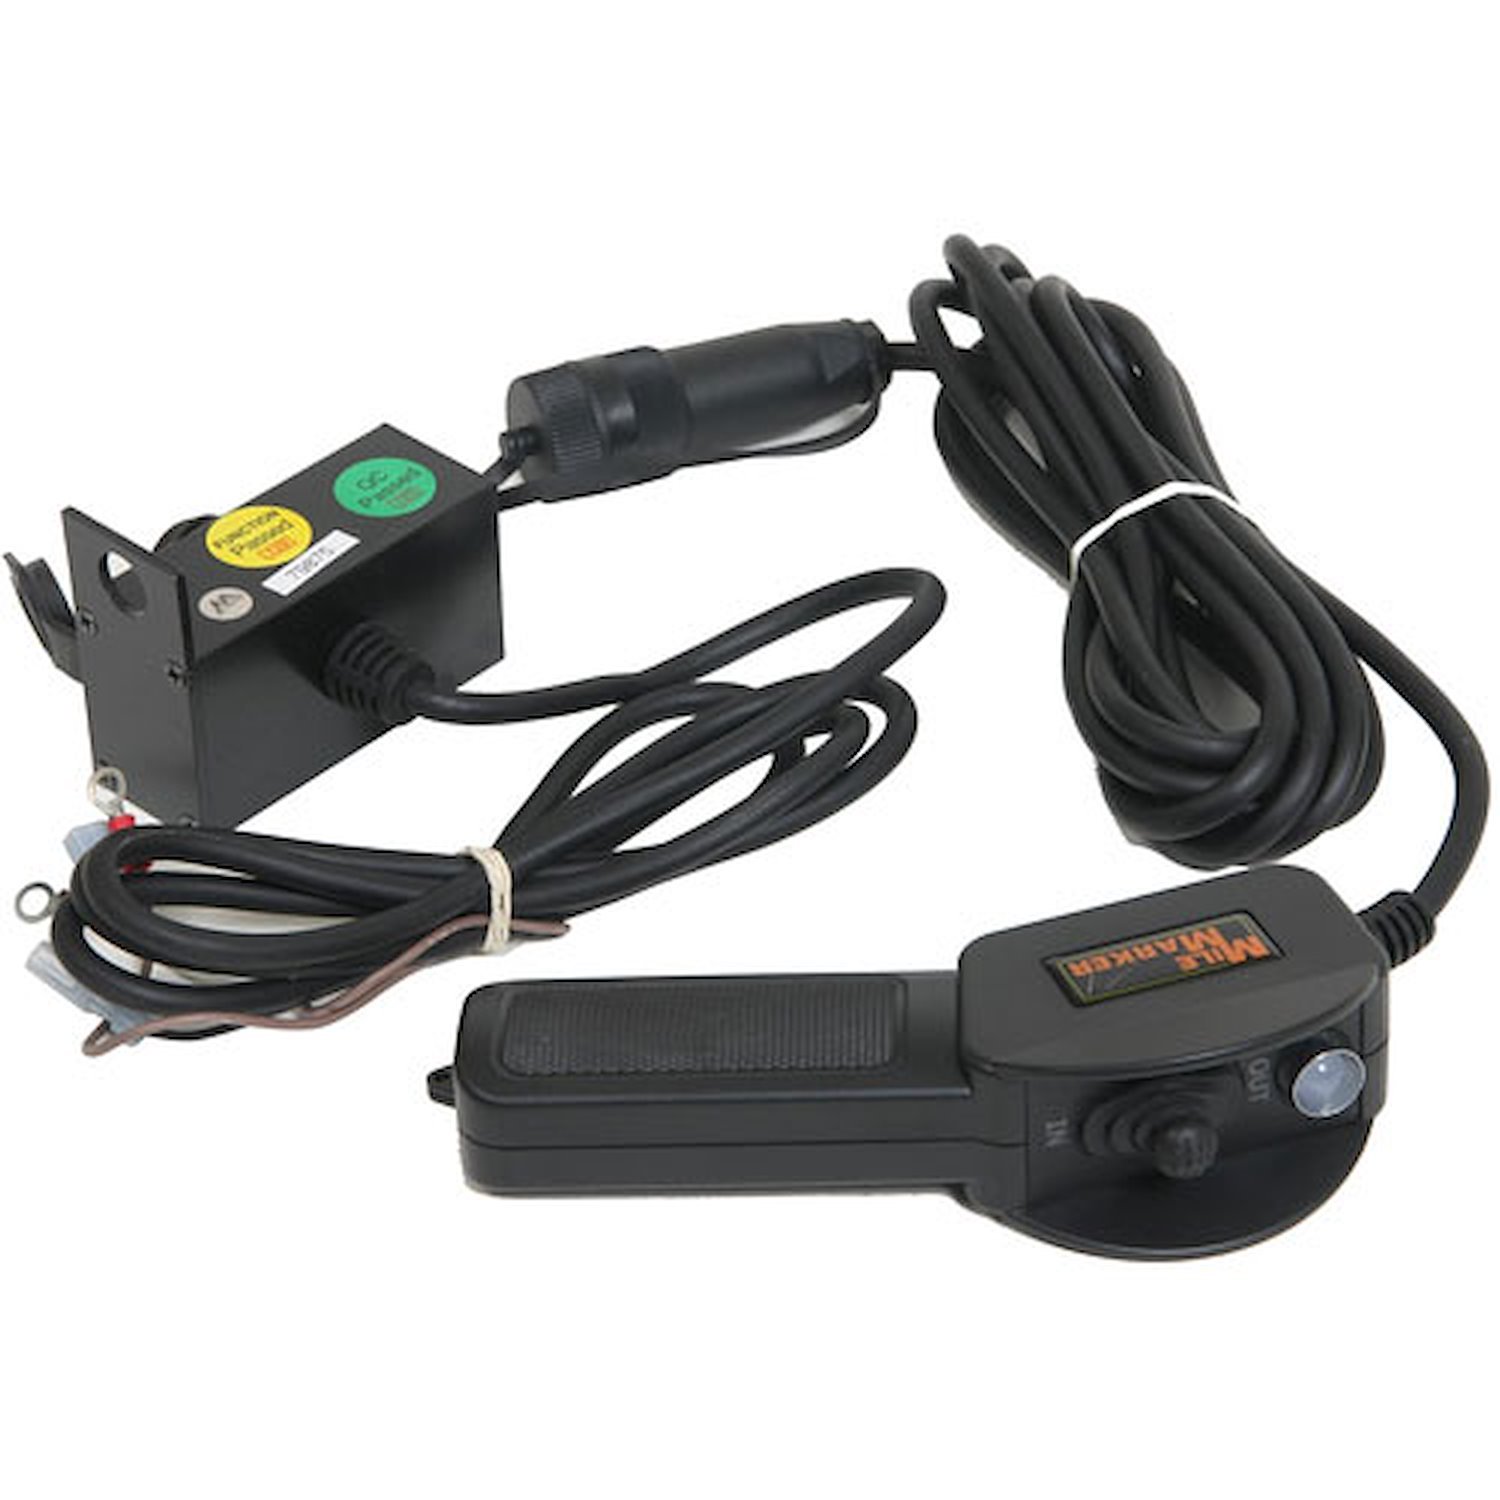 Plug & Play Wired Remote For All Hydraulic Winches (Mile Marker winches and all other brands)